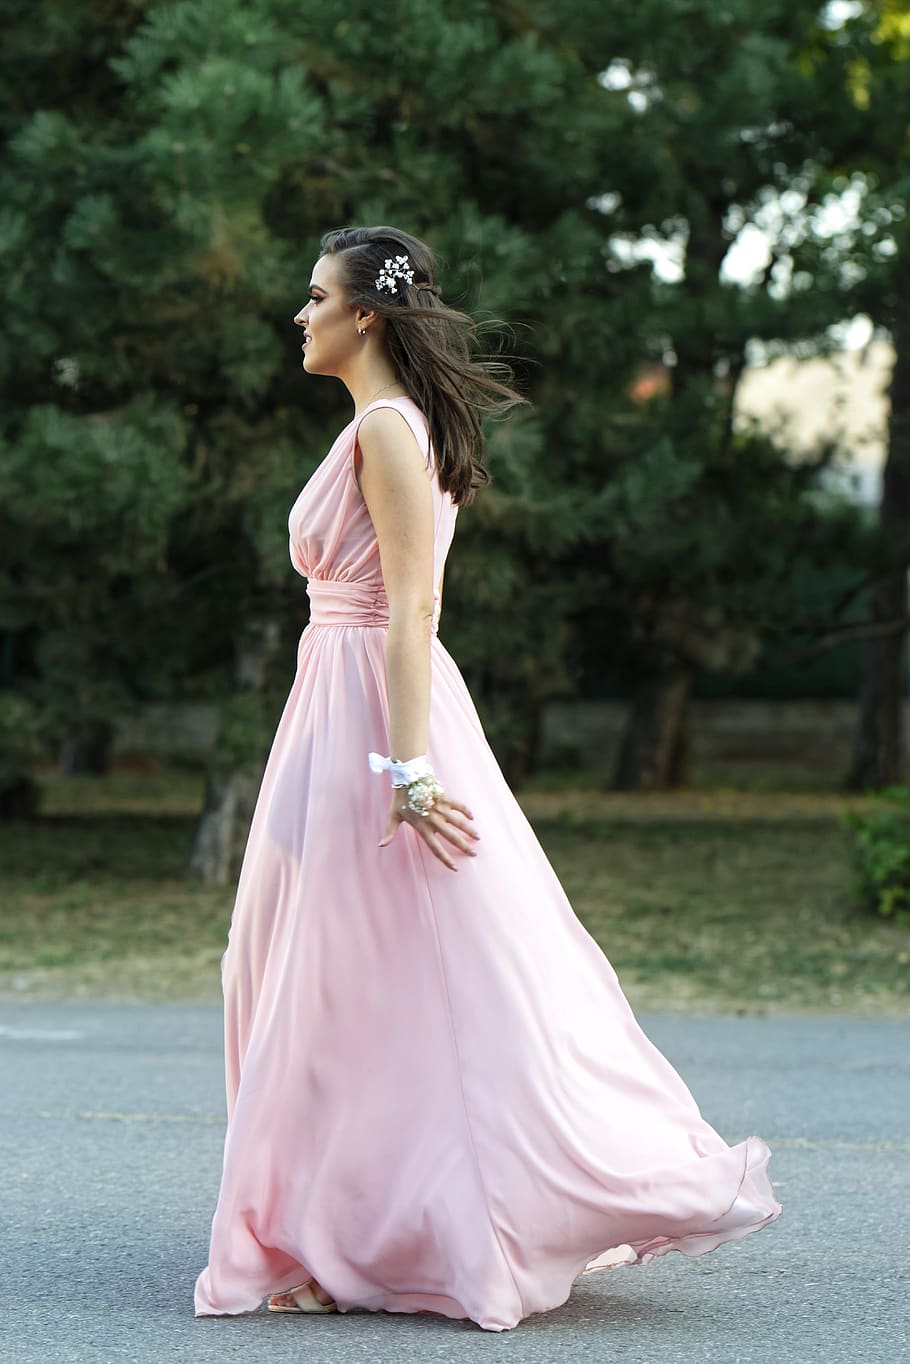 girl, woman, young, beautiful, long prom dress, pink, long hair, the maid of honor, event, marriage